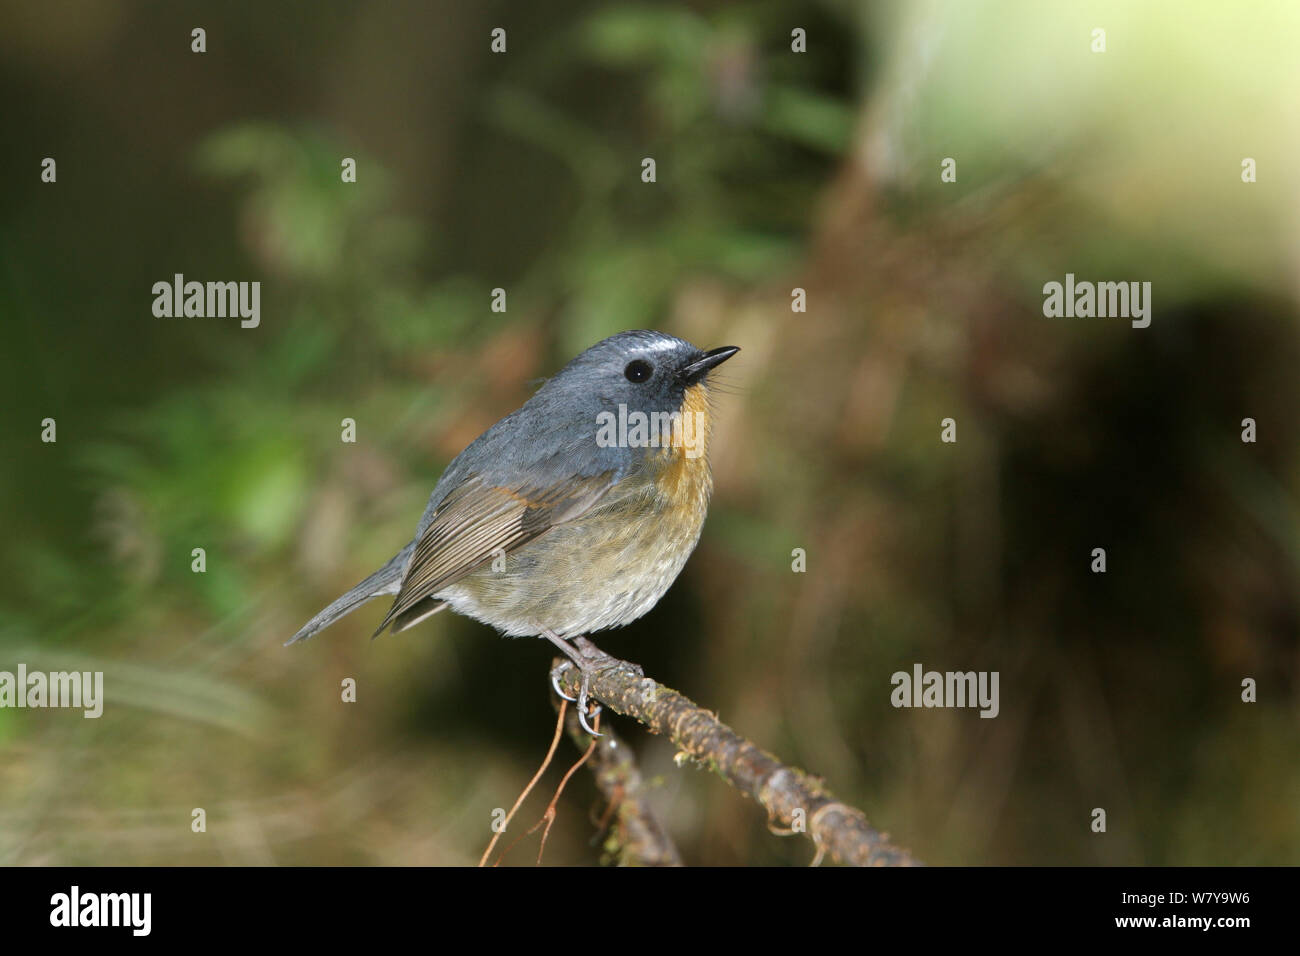 Snowy browed flycatcher (Ficedula hyperythra) perched, Thailand, February Stock Photo